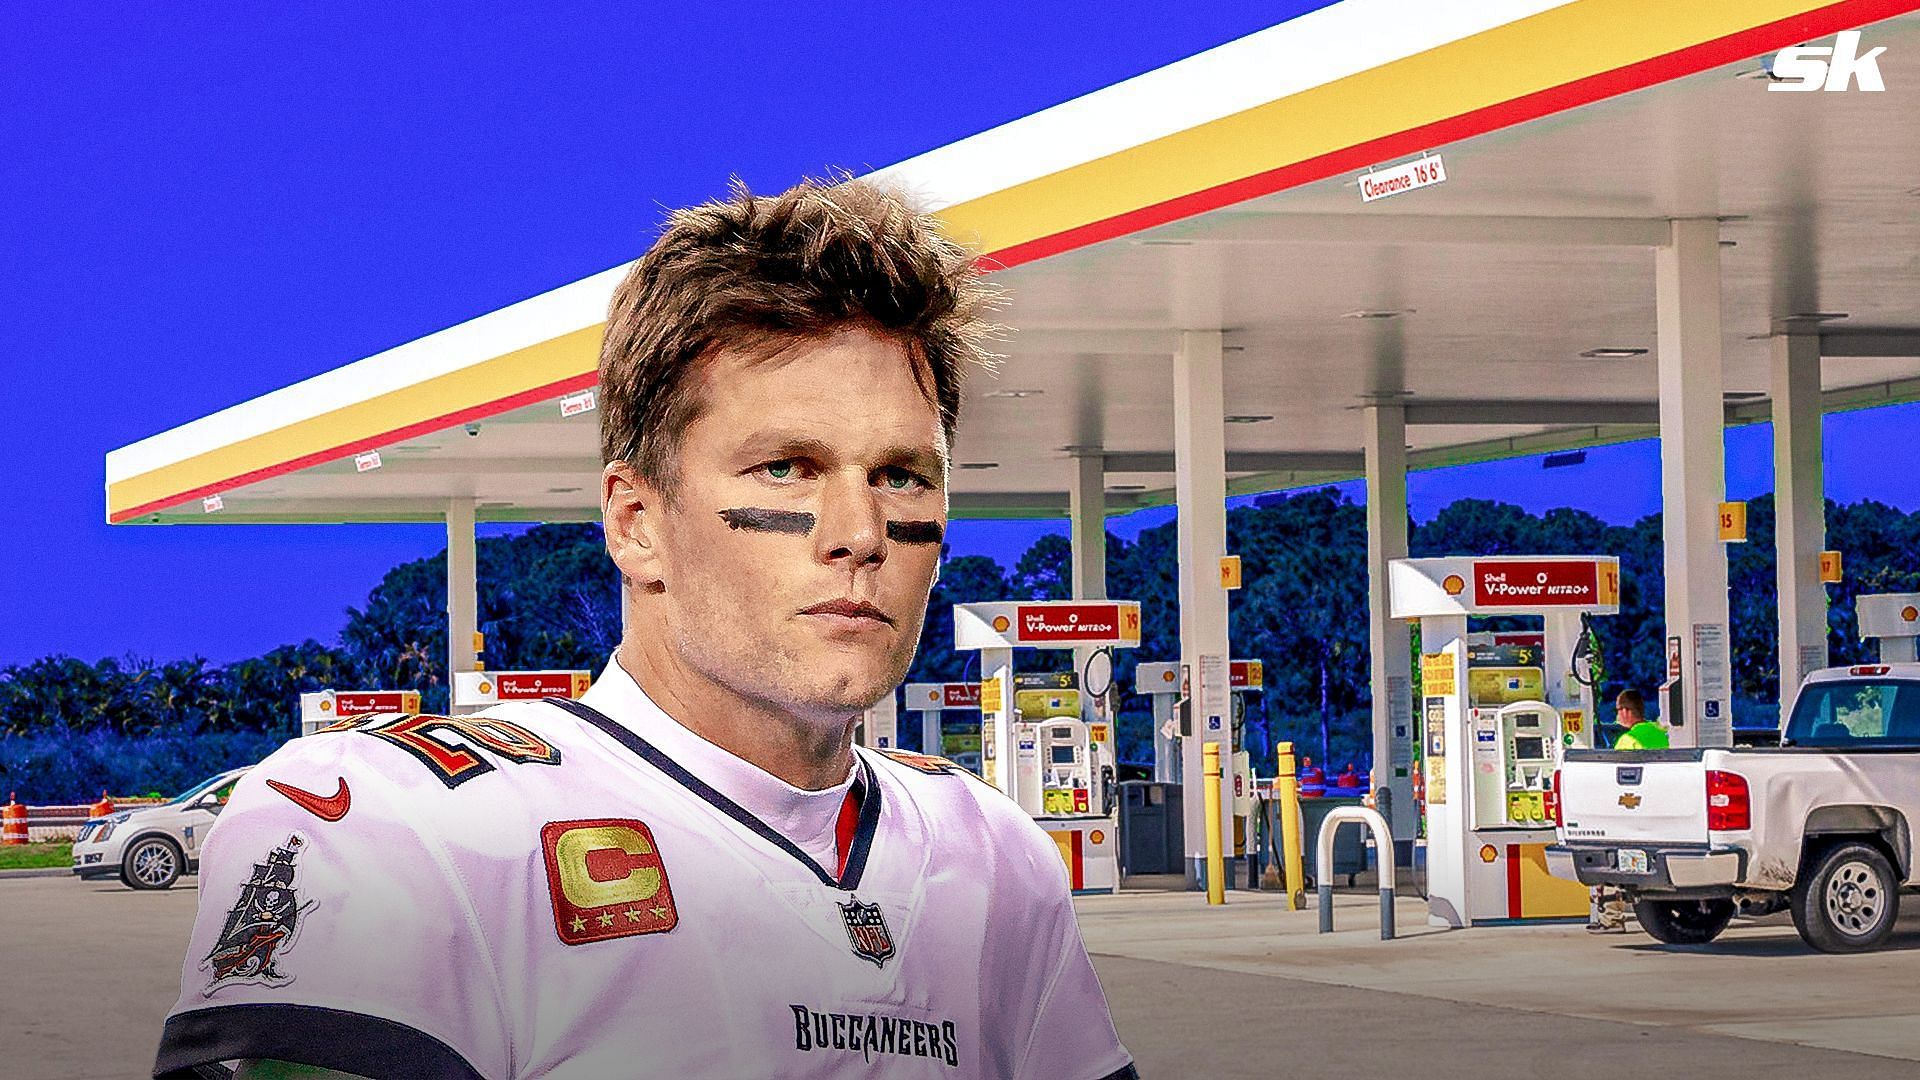 Tom Brady has come out of his retirement